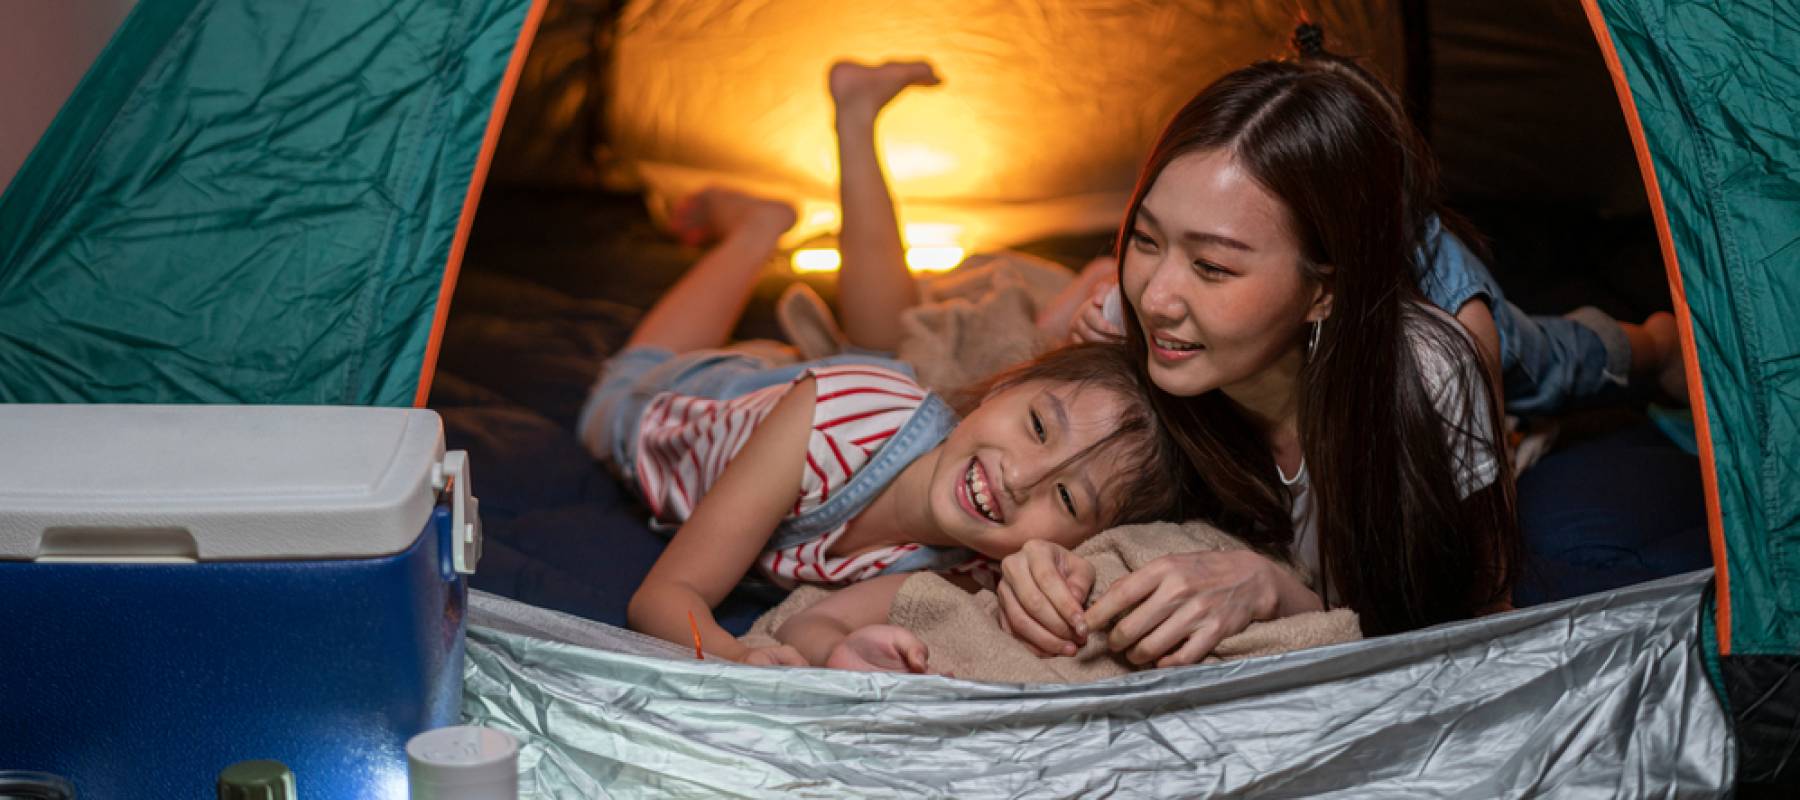 Asian woman playing and staying in tent with her daughter and having fun with camping tent in their bedroom a staycation lifestyle